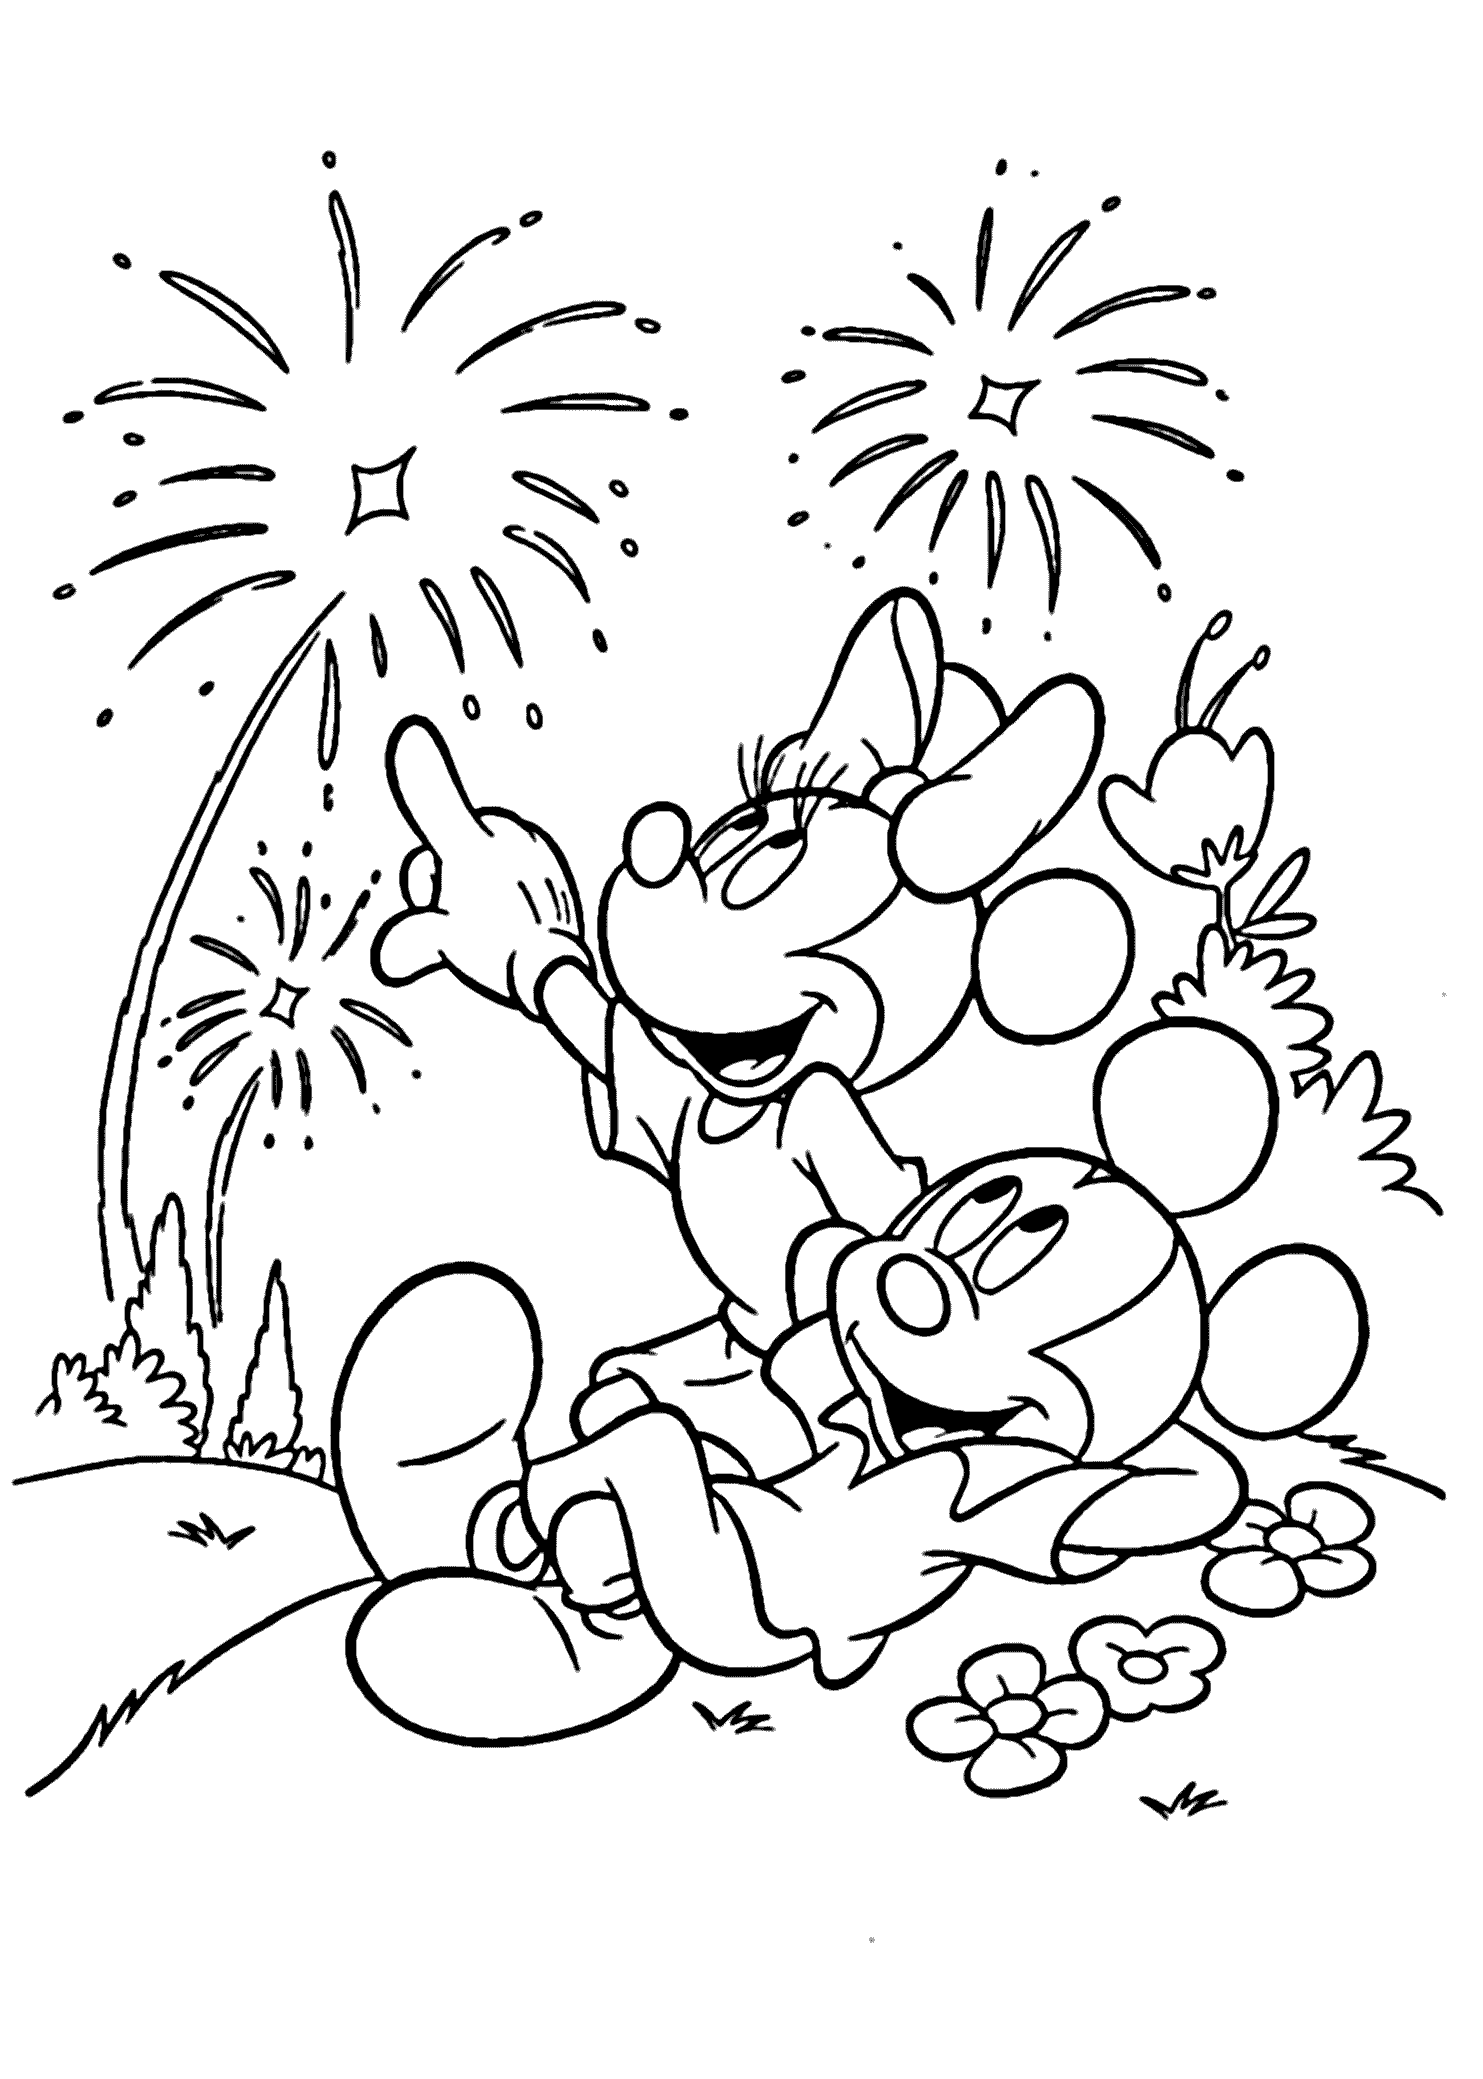 Fireworks Coloring Pages for boys Fireworks in July Printable 2020 0349 Coloring4free